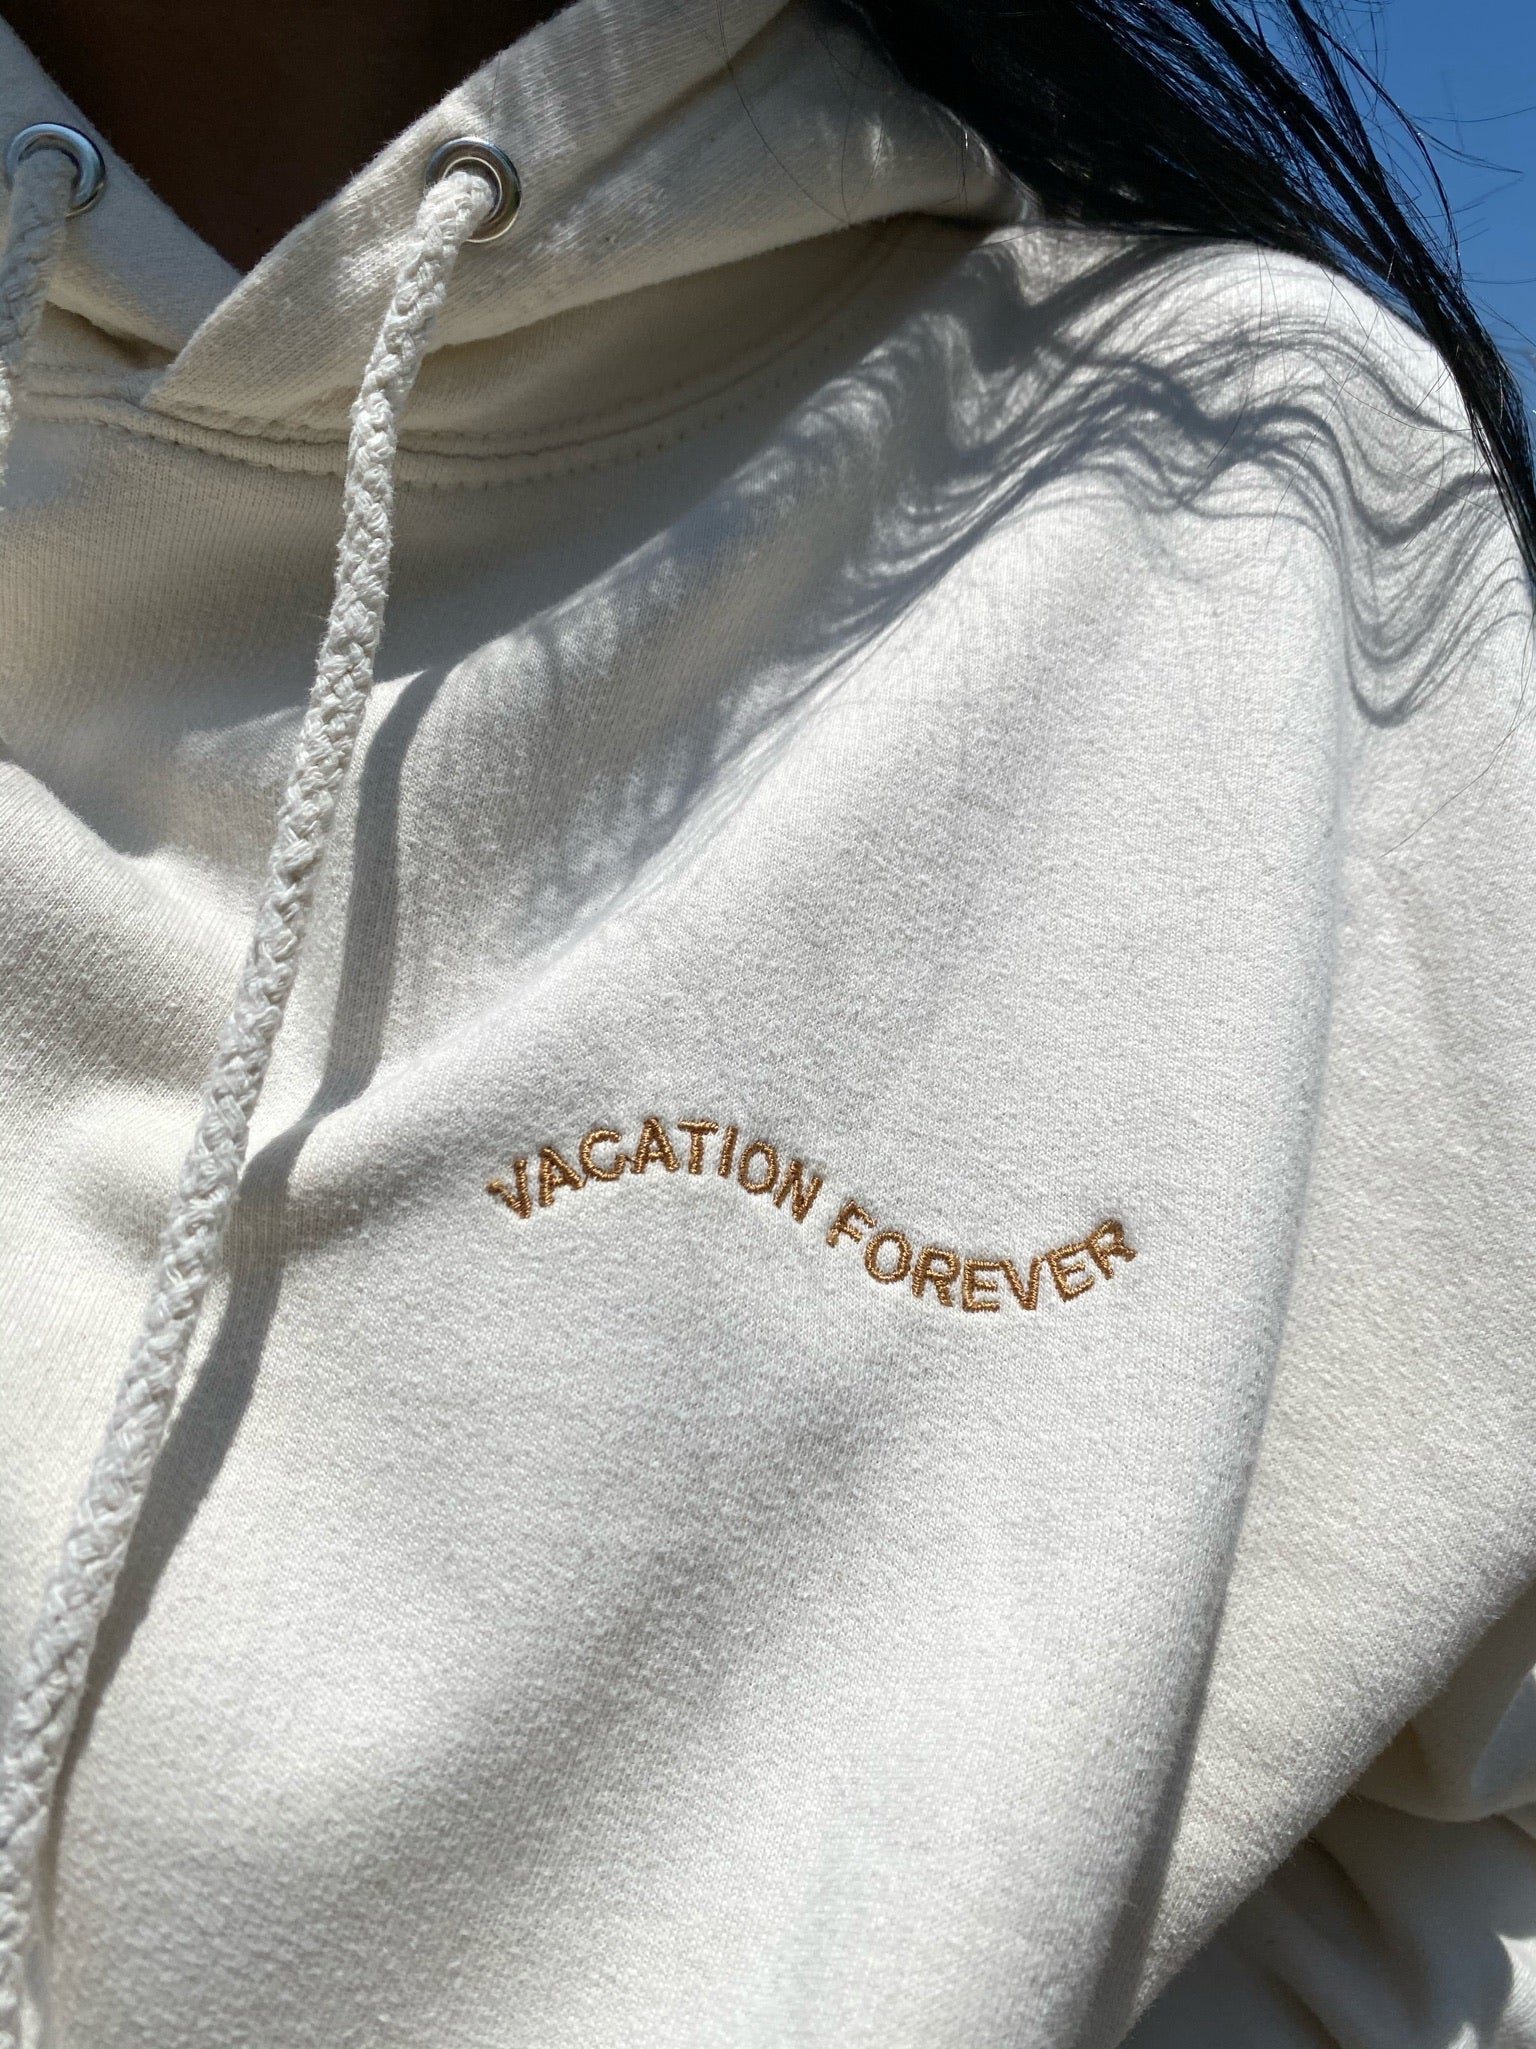 Bali Vacation Forever Hooded Sweater